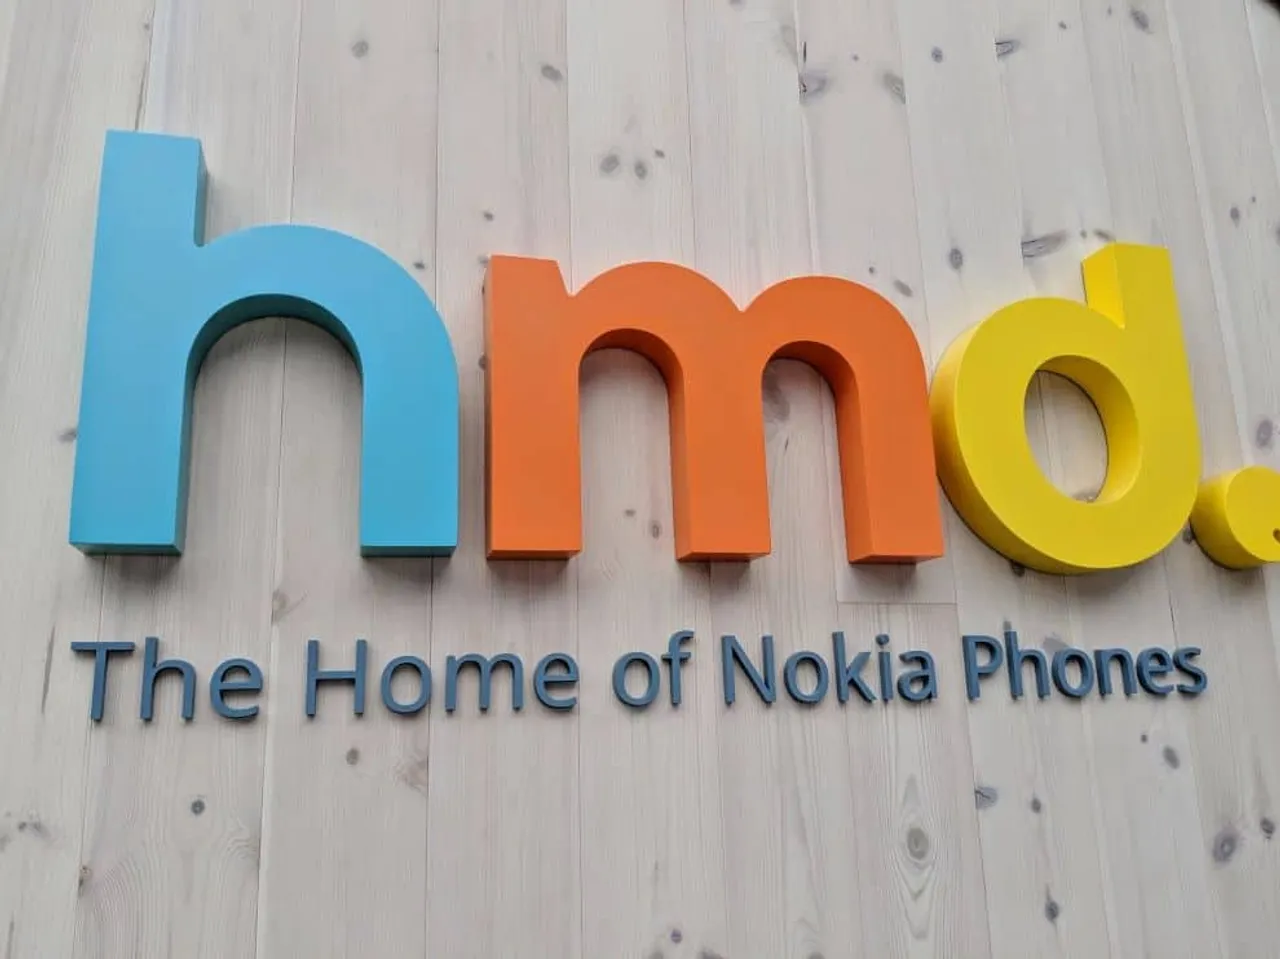 HMD Global says that this investment will further fuel its vision in four key areas and will accelerate the company’s mission to make 5G smartphones.